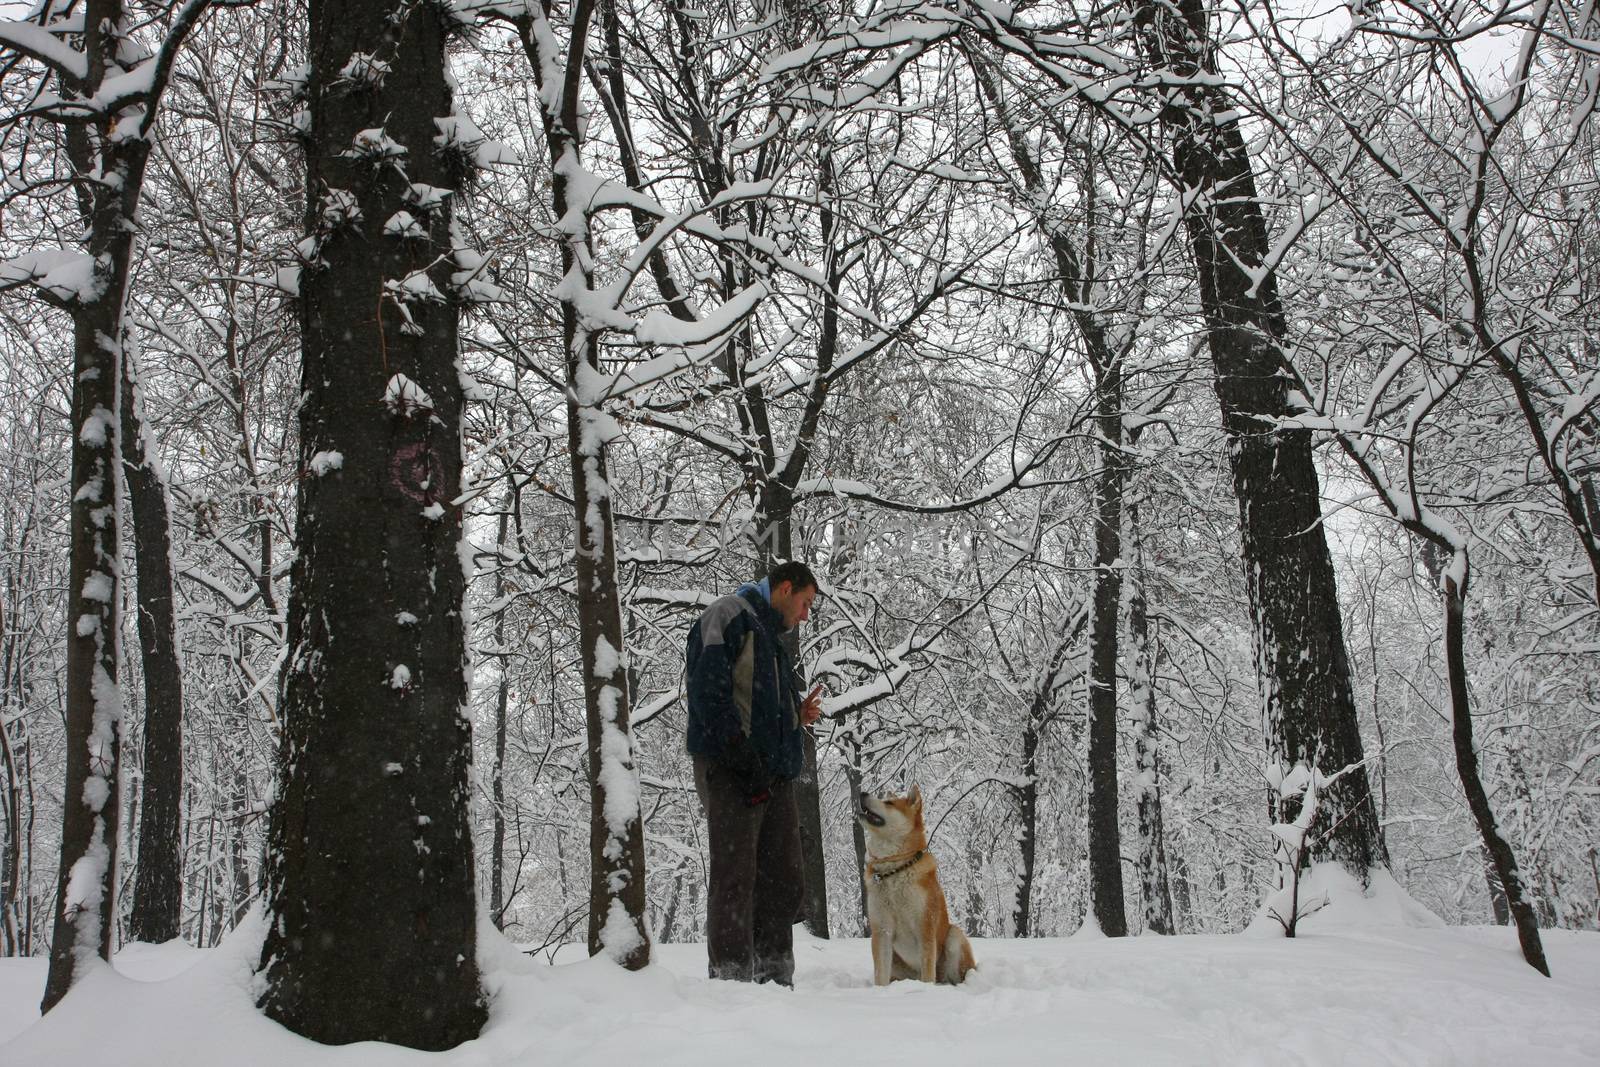 Man and dog in the snow by tdjoric